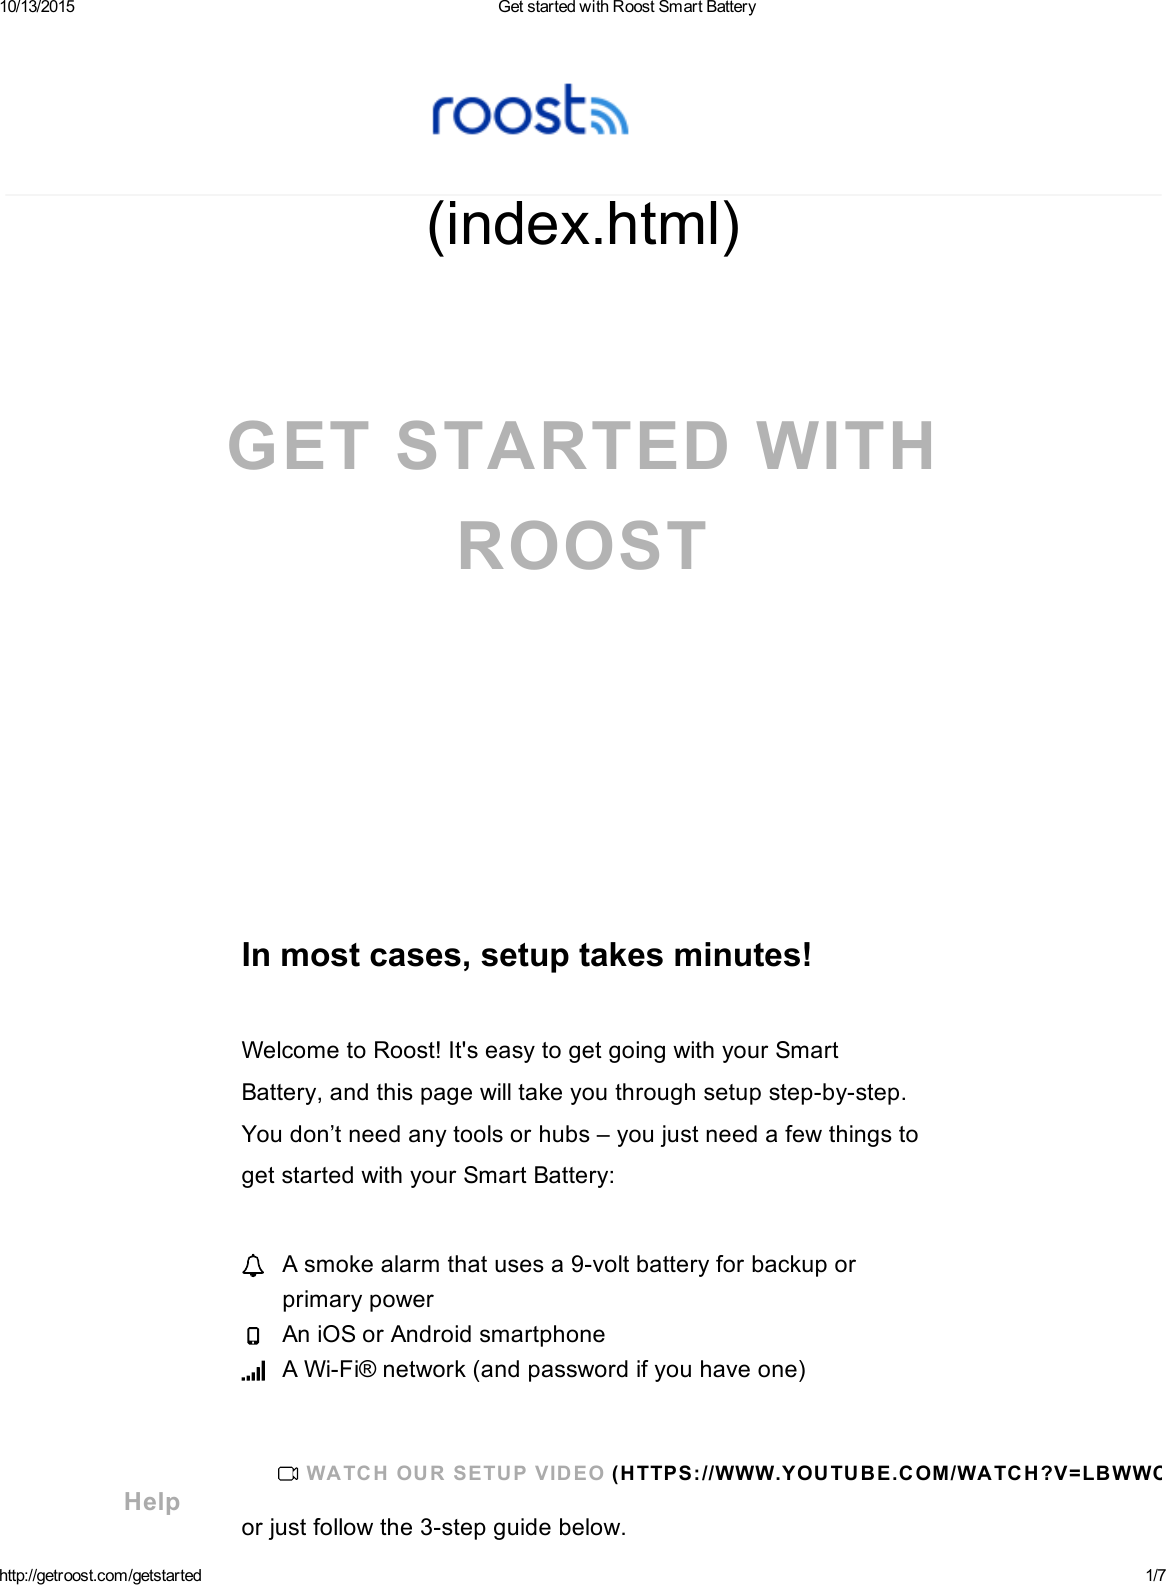 10/13/2015 GetstartedwithRoostSmartBatteryhttp://getroost.com/getstarted 1/7(index.html)GETSTARTEDWITHROOSTInmostcases,setuptakesminutes!WelcometoRoost!It&apos;seasytogetgoingwithyourSmartBattery,andthispagewilltakeyouthroughsetupstepbystep.Youdon’tneedanytoolsorhubs–youjustneedafewthingstogetstartedwithyourSmartBattery:orjustfollowthe3stepguidebelow.Asmokealarmthatusesa9voltbatteryforbackuporprimarypowerAniOSorAndroidsmartphoneAWiFi®network(andpasswordifyouhaveone)WA TC HOU RSETU PVIDEO(H TTPS://WWW.YOU TU BE.COM/WATCH?V=LBWWC XZE0_ 0)Help